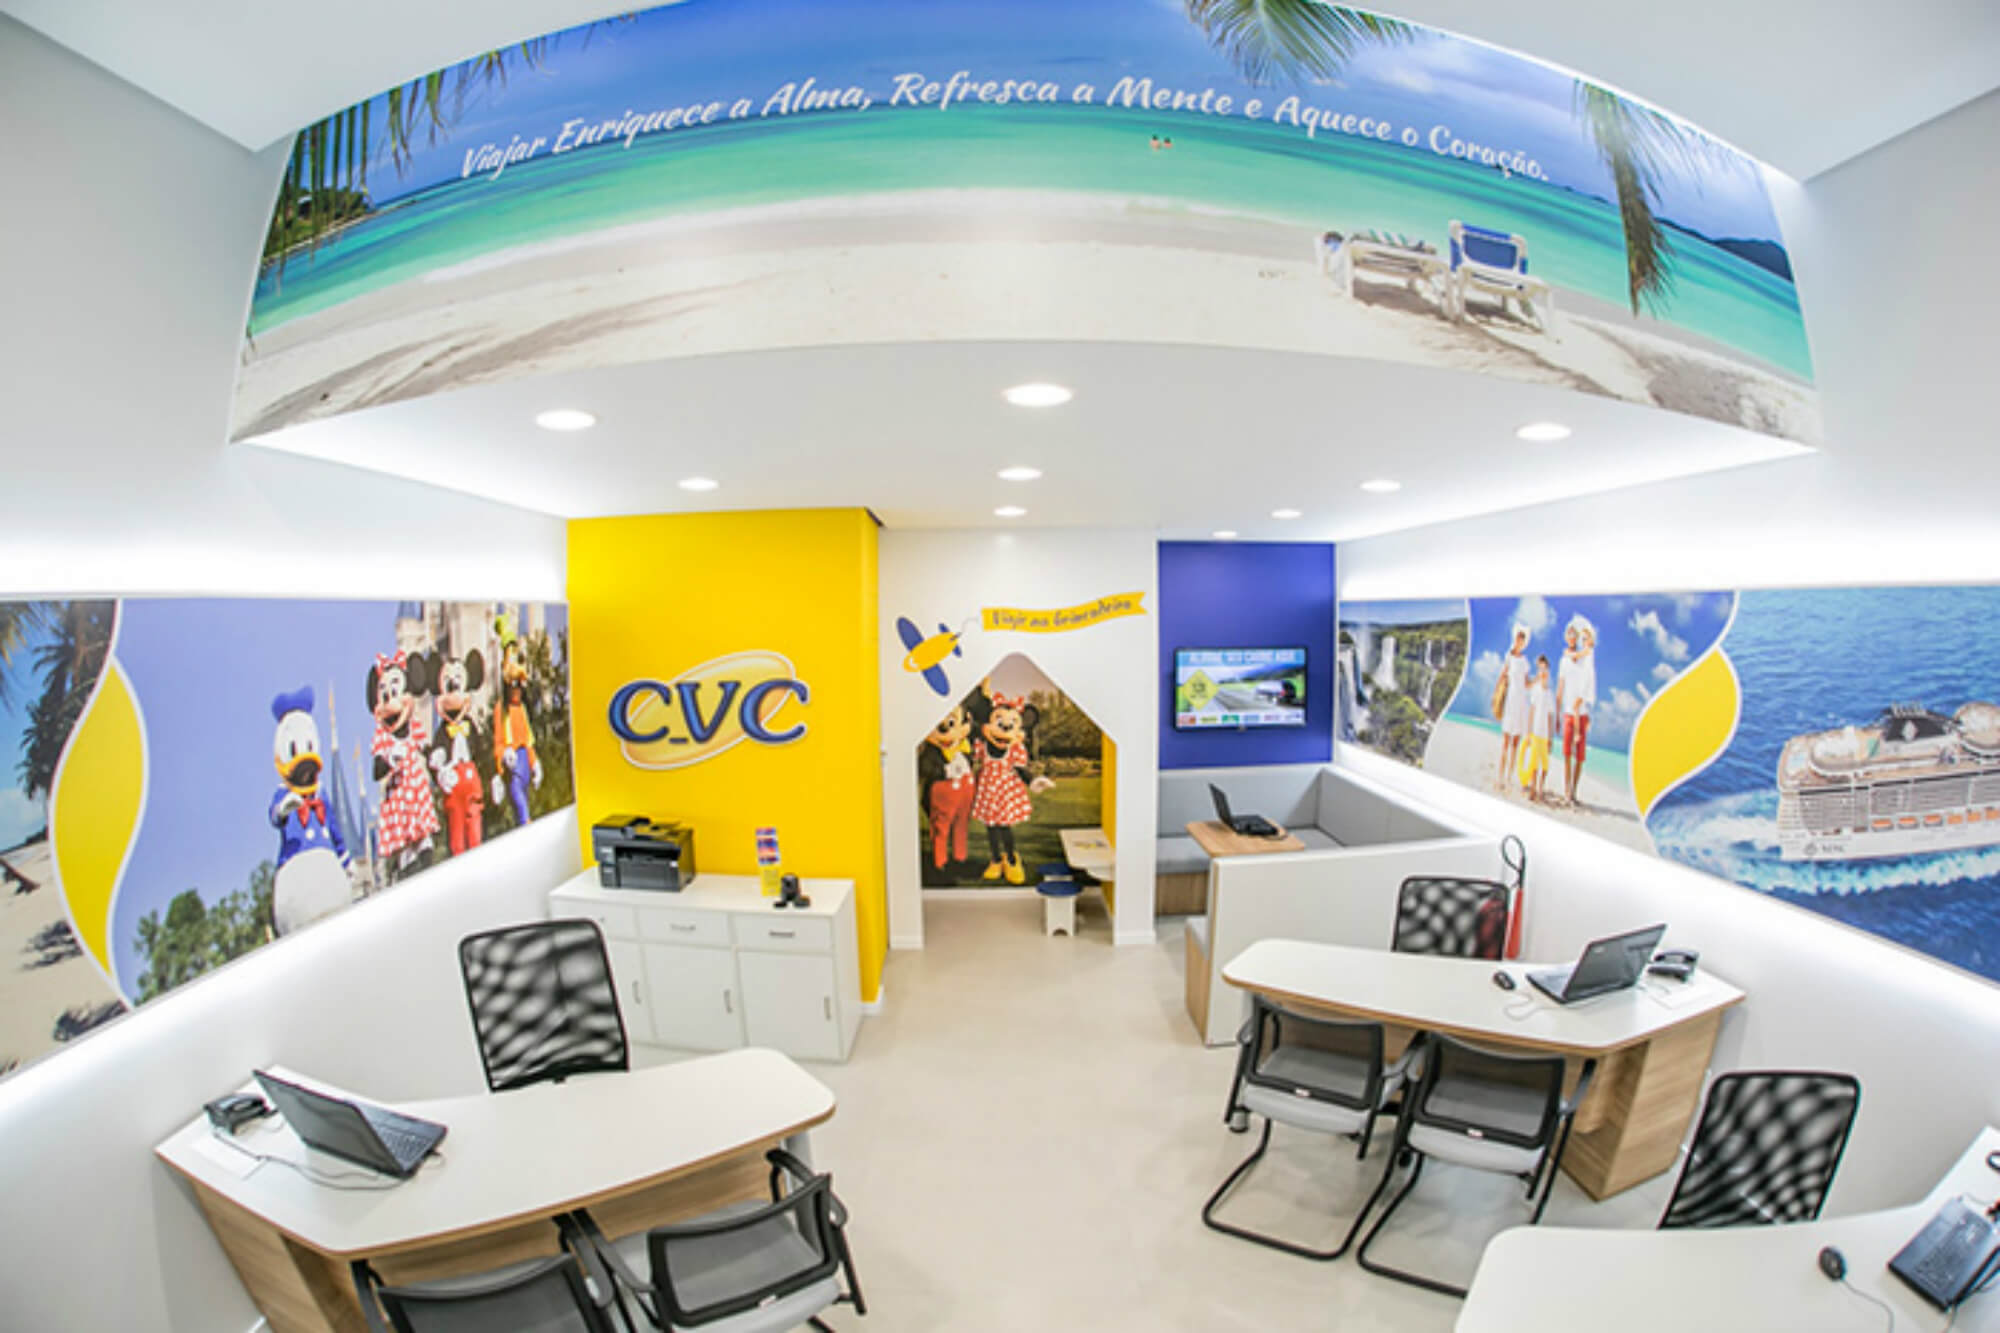 CVC (CVCB3) is firing 4% of its employees;  Celg-D, from Equatorial (EQTL3), will issue R$7 billion in bonds